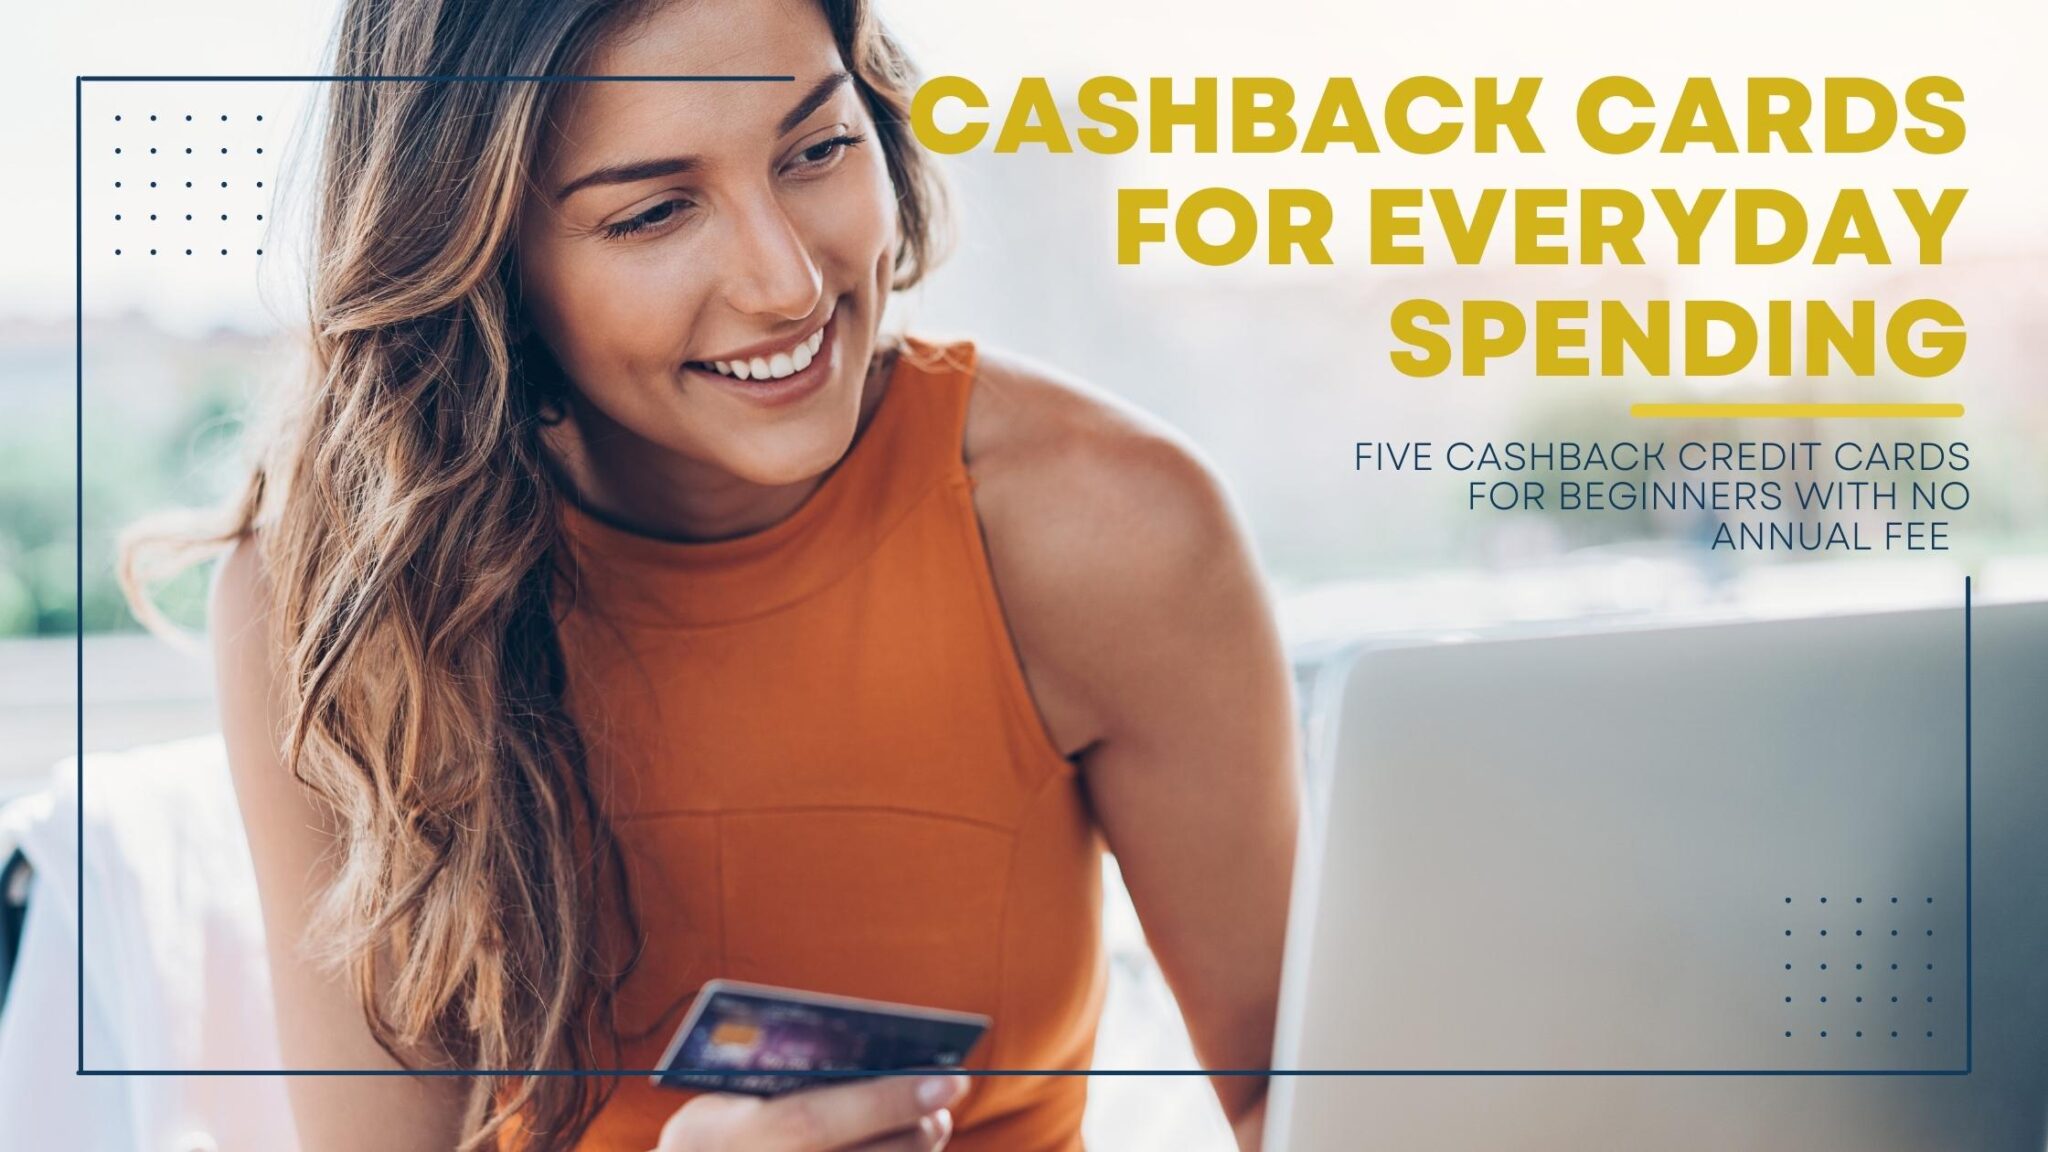 the-top-cashback-credit-cards-for-everyday-spending-rewards-with-no